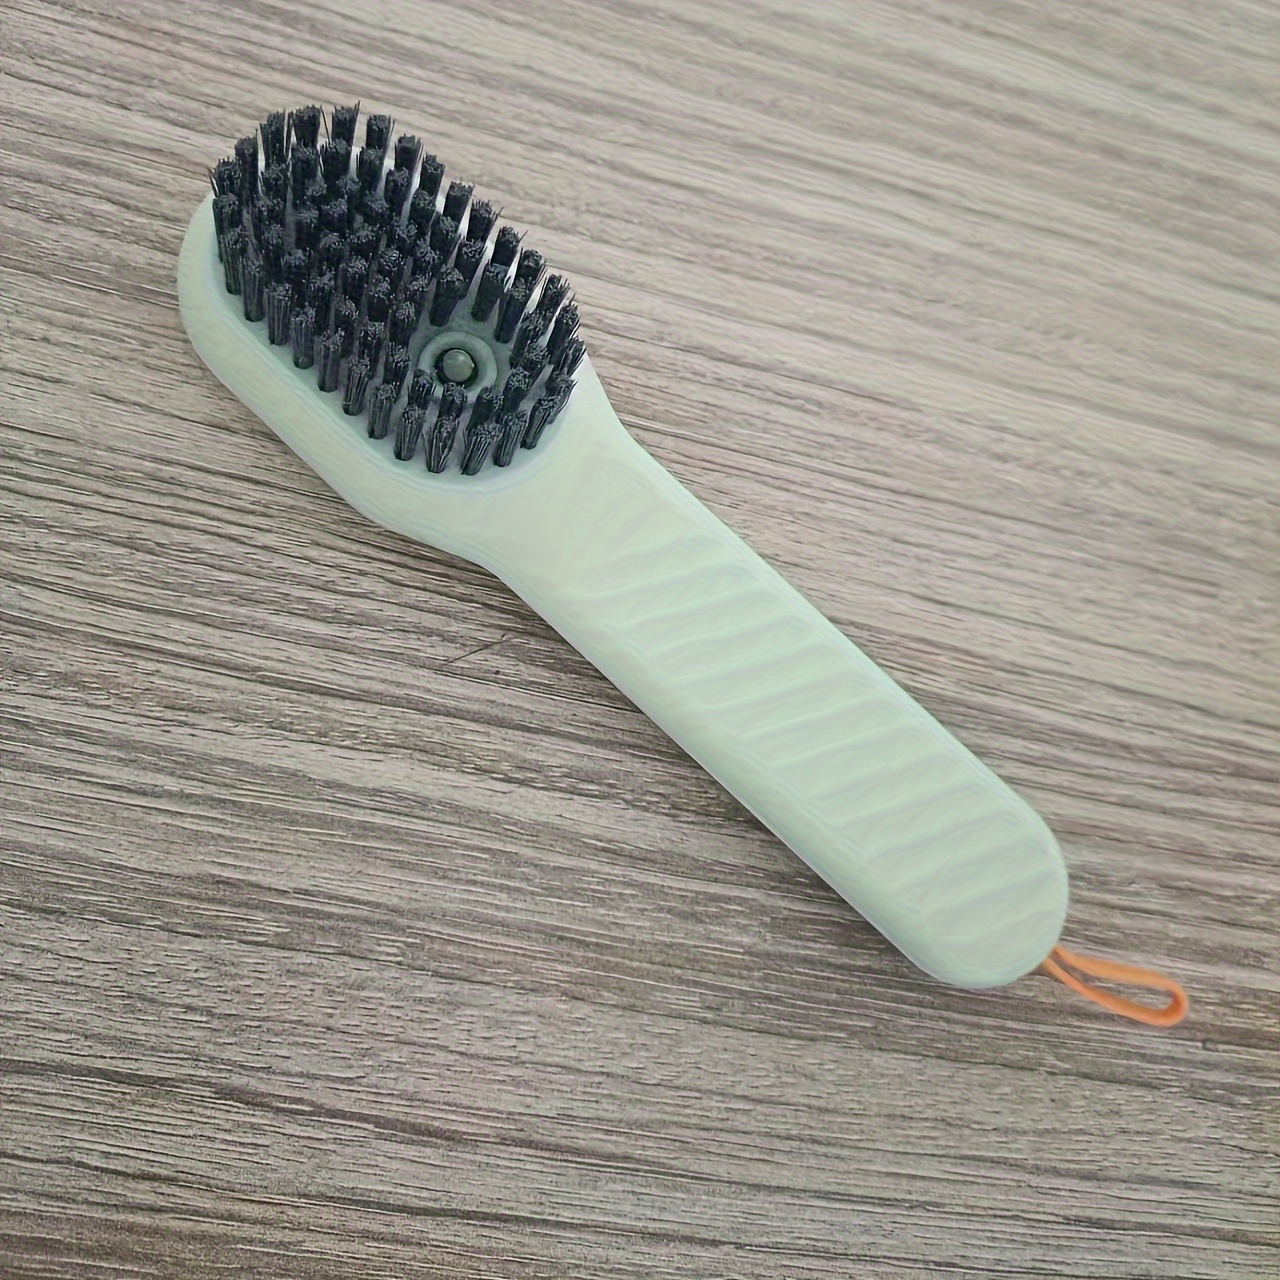 1pc Press-type Liquid Dispensing Shoe Brush, Multifunctional Soft Bristle Cleaning  Brush For Shoes And Clothes, Home Use